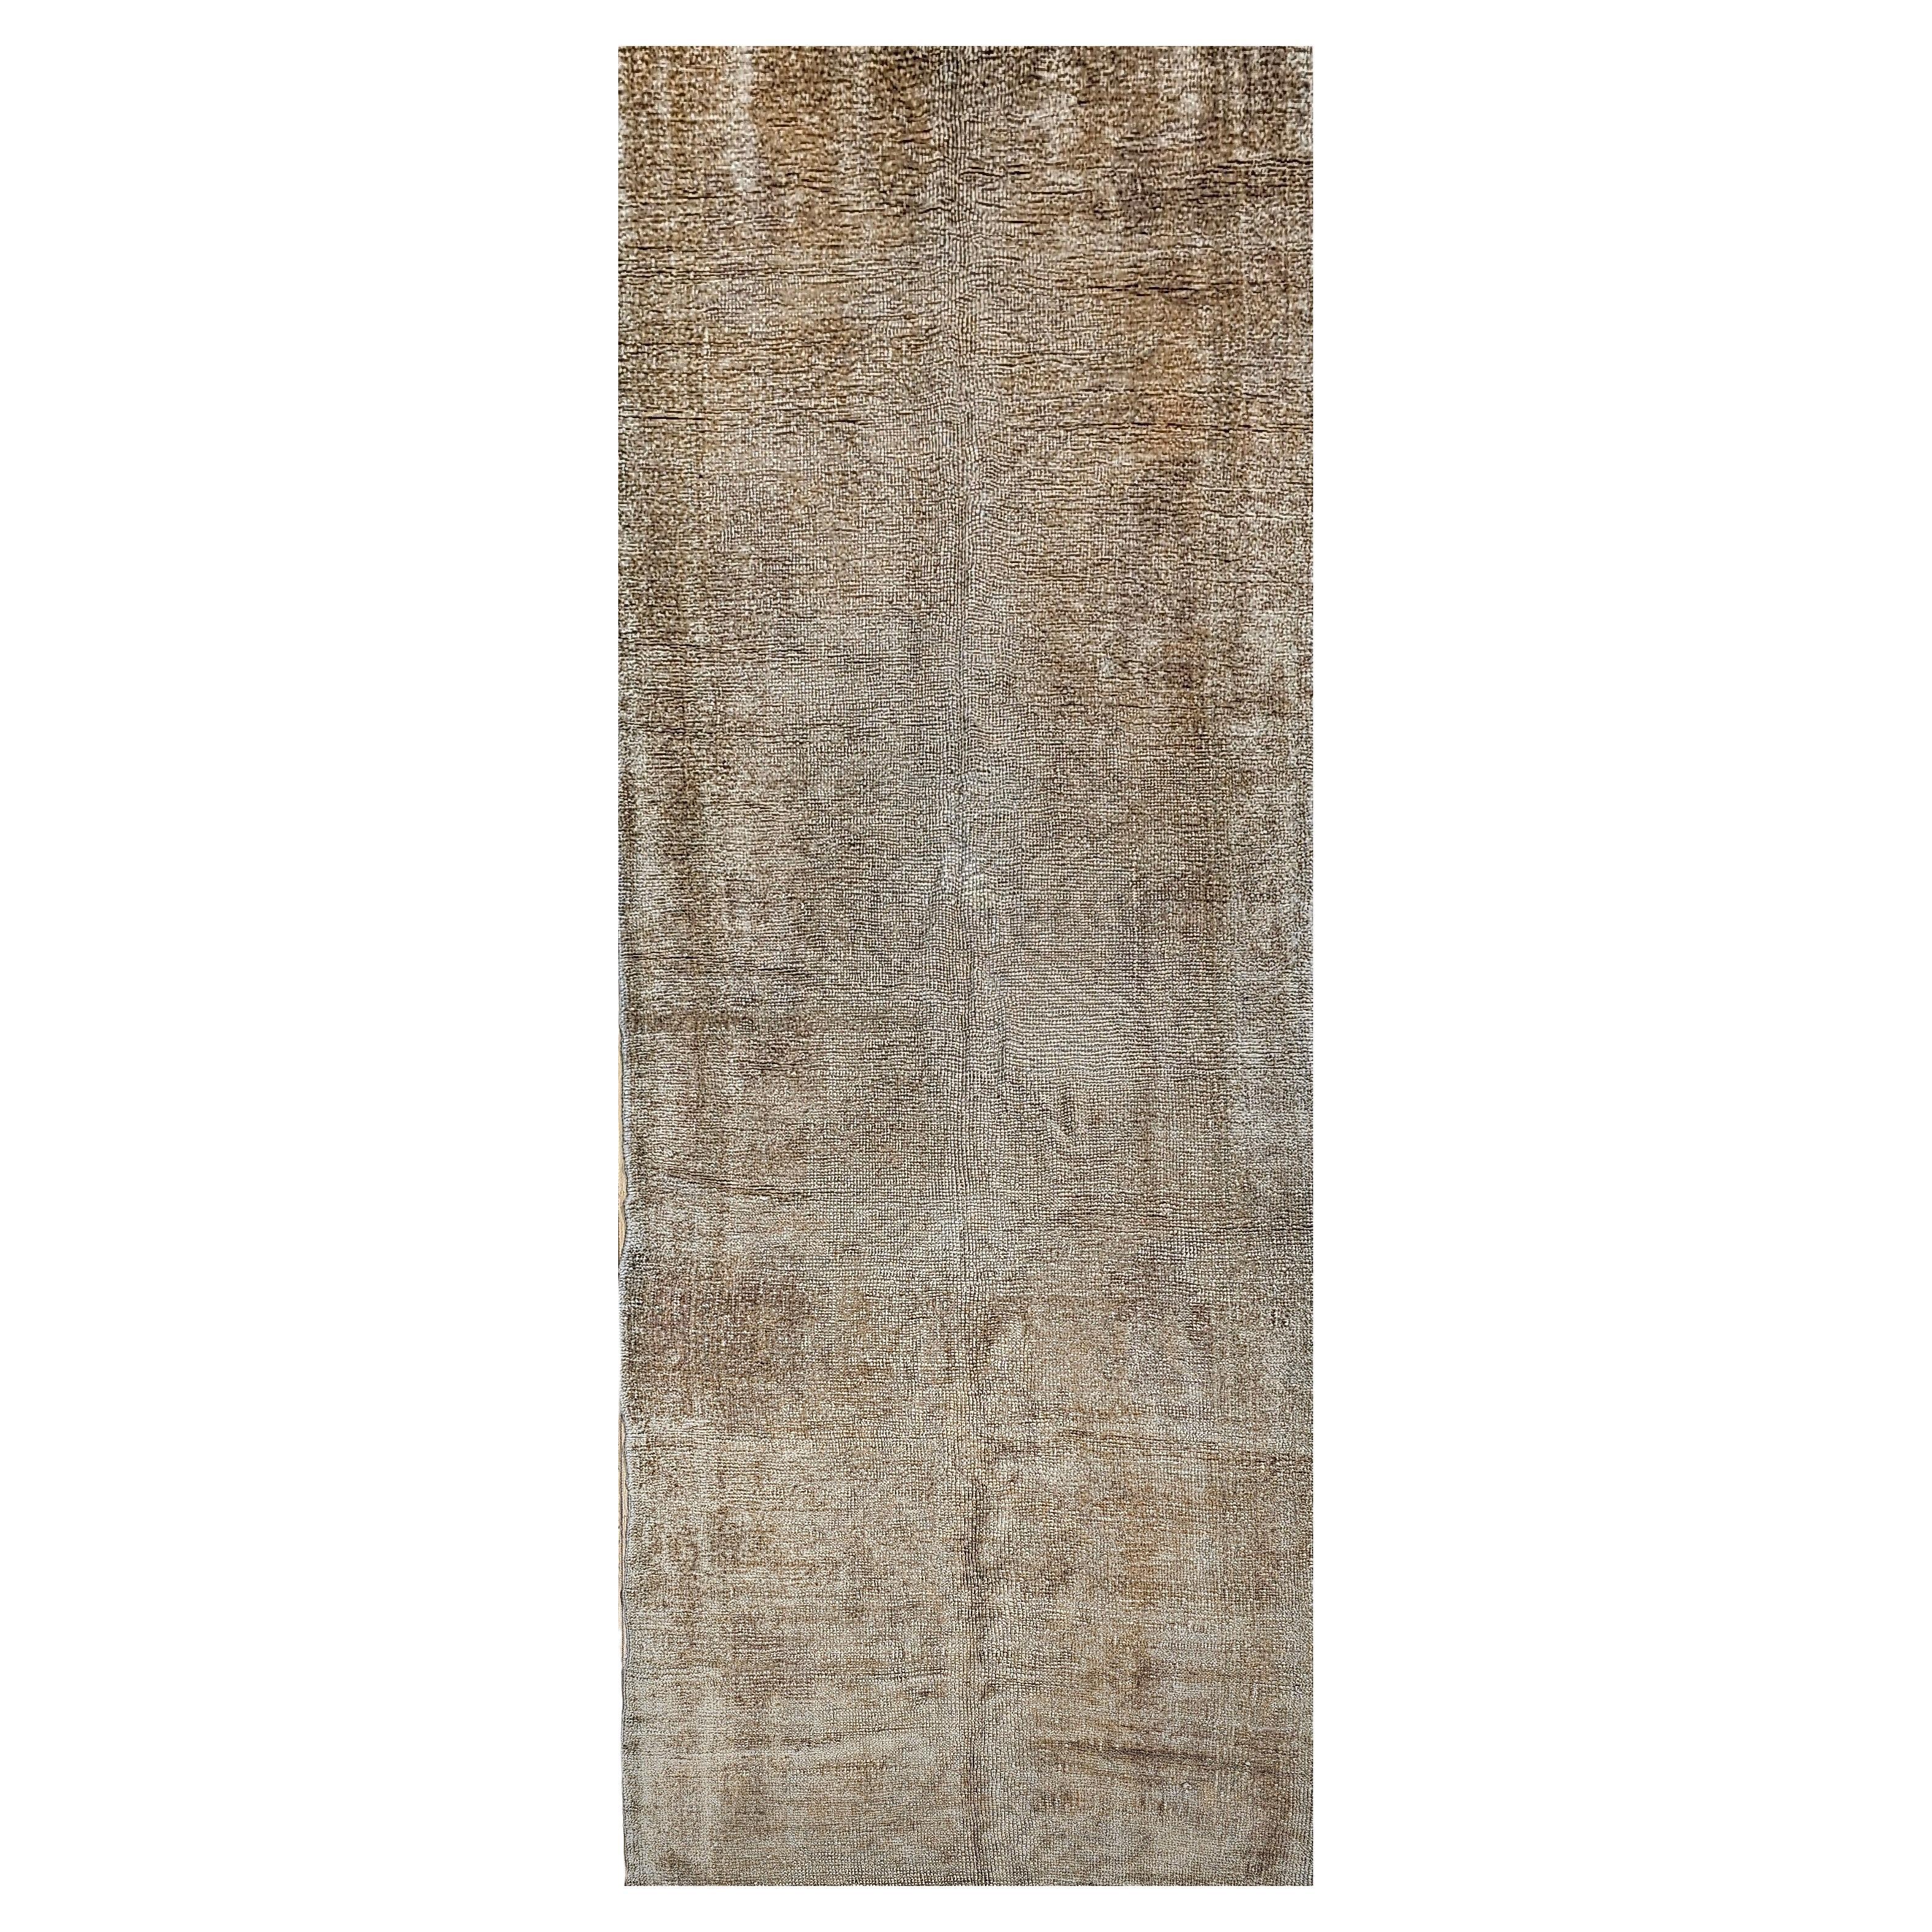 Simple but beautiful best describes this light taupe color Turkish Oushak wide runner from the early 1900s.  The Oushak runner has a muted color style.  Showcasing timeless elegance in a demure color palette this hand-knotted wool vintage Turkish